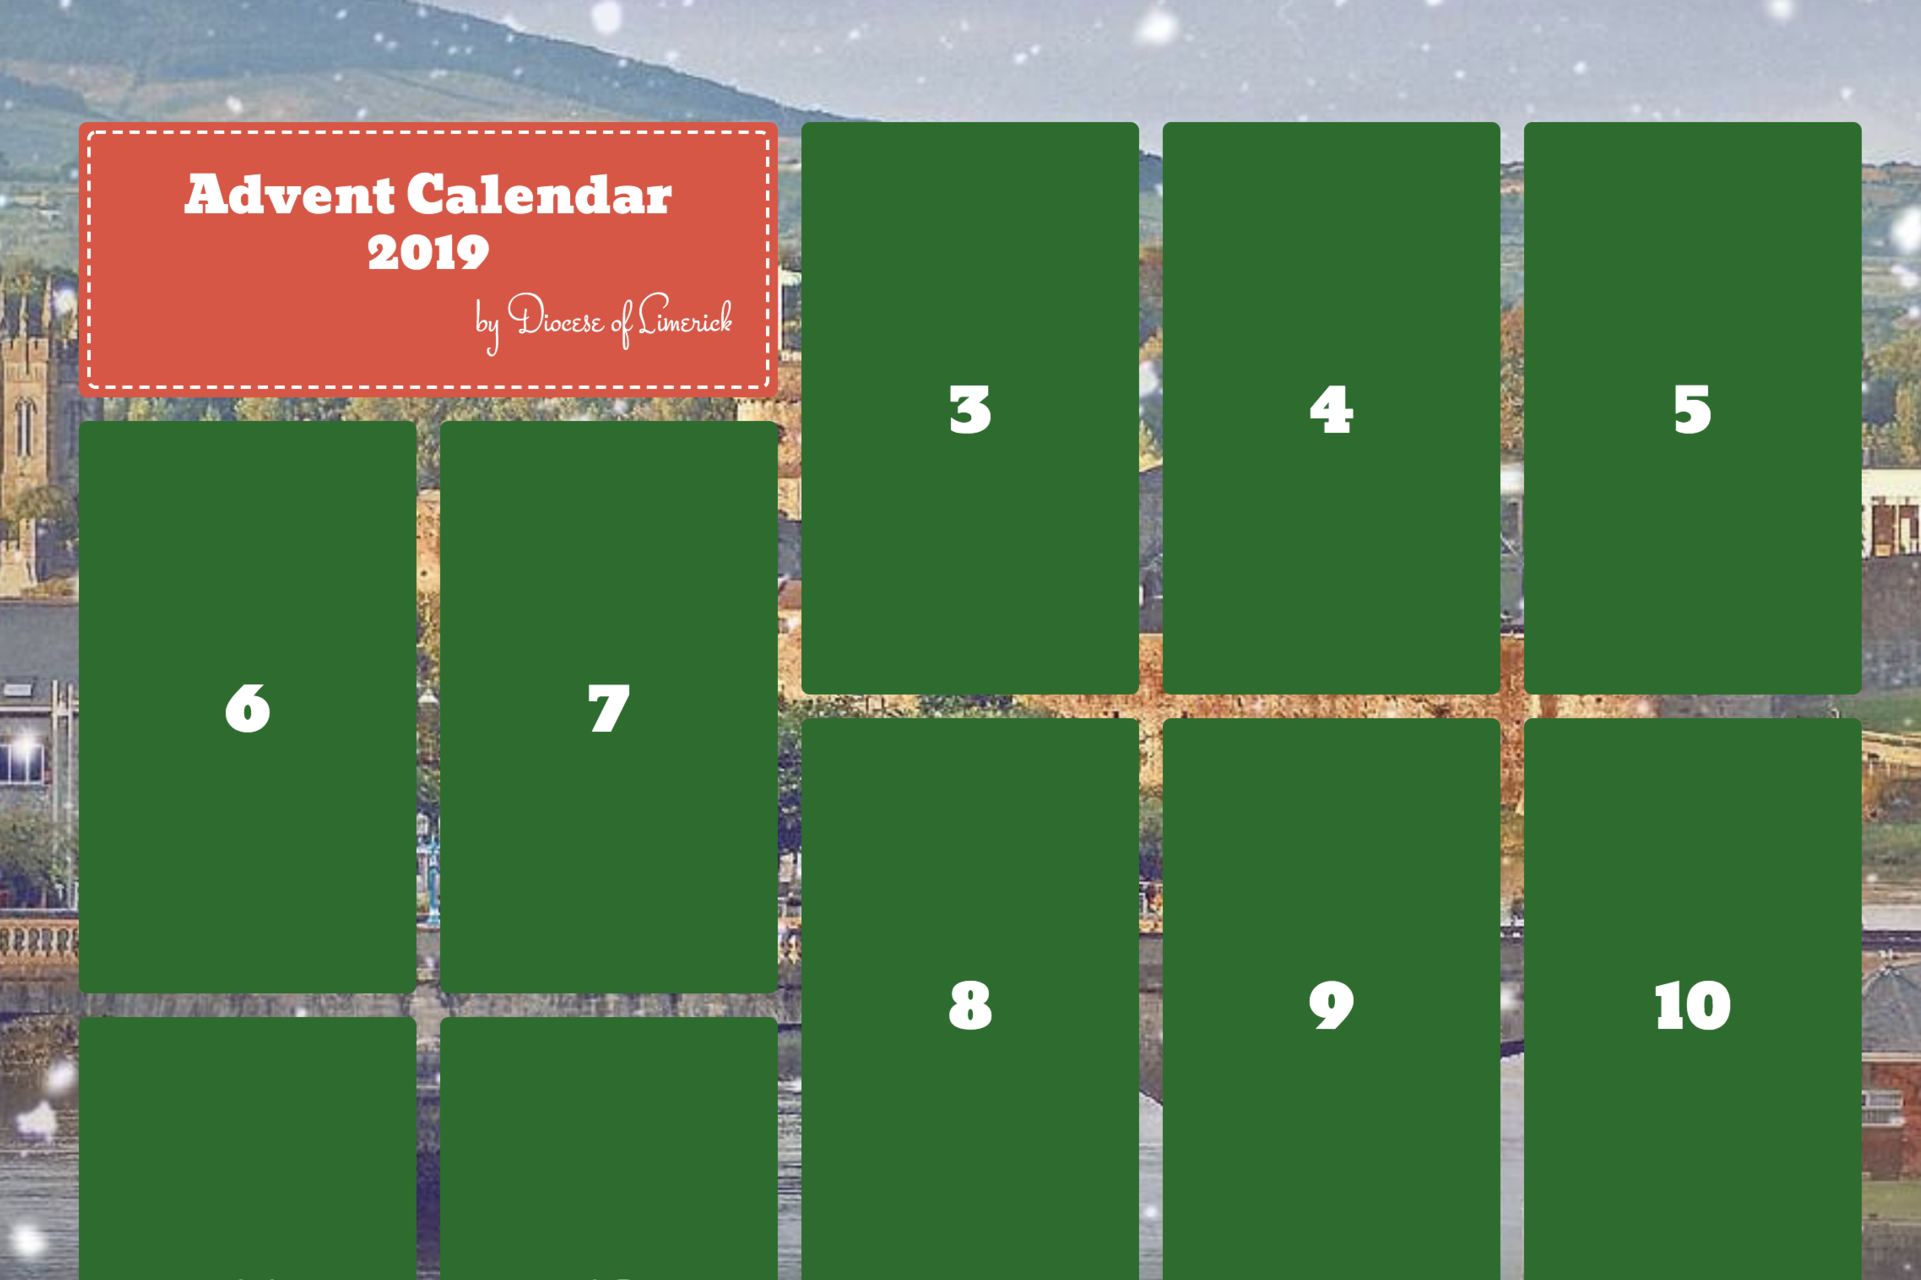 Our Advent Calendar is now live!